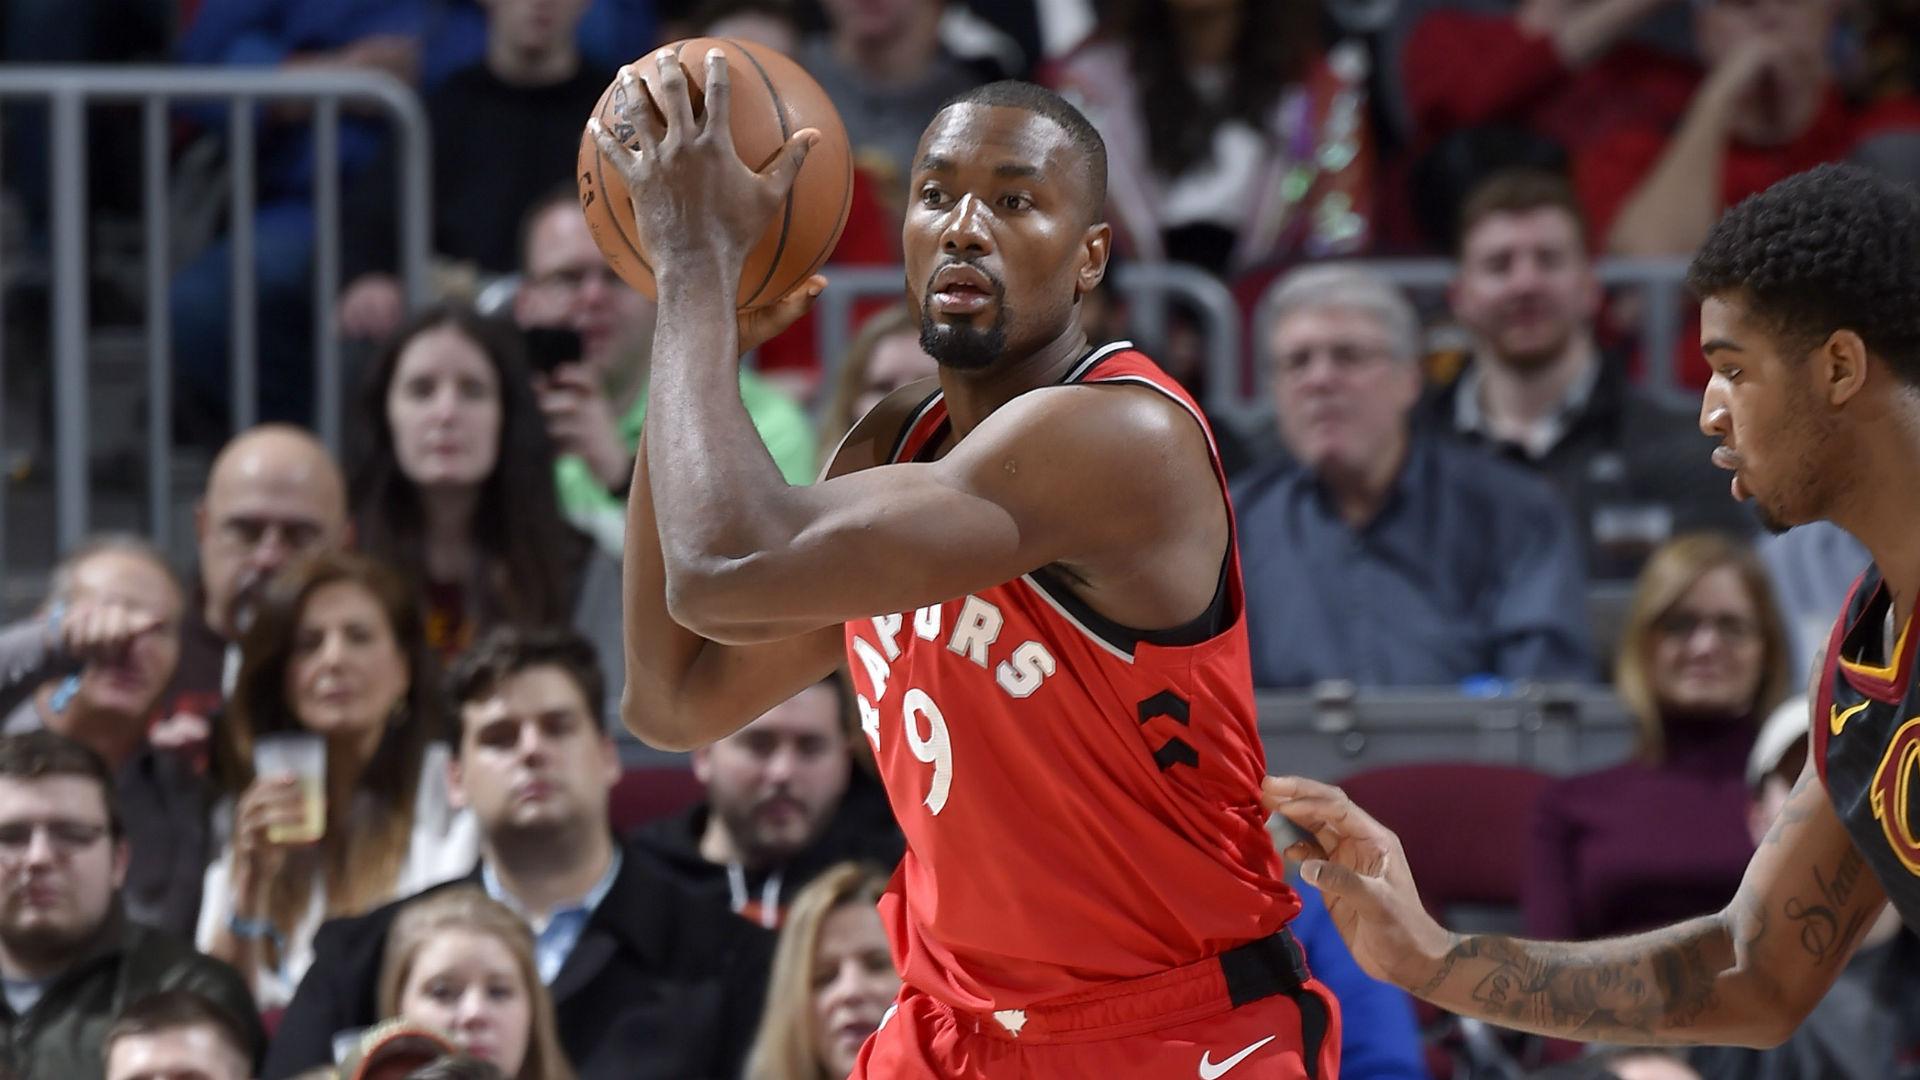 NBA announces suspensions for Raptors Serge Ibaka and Cavaliers